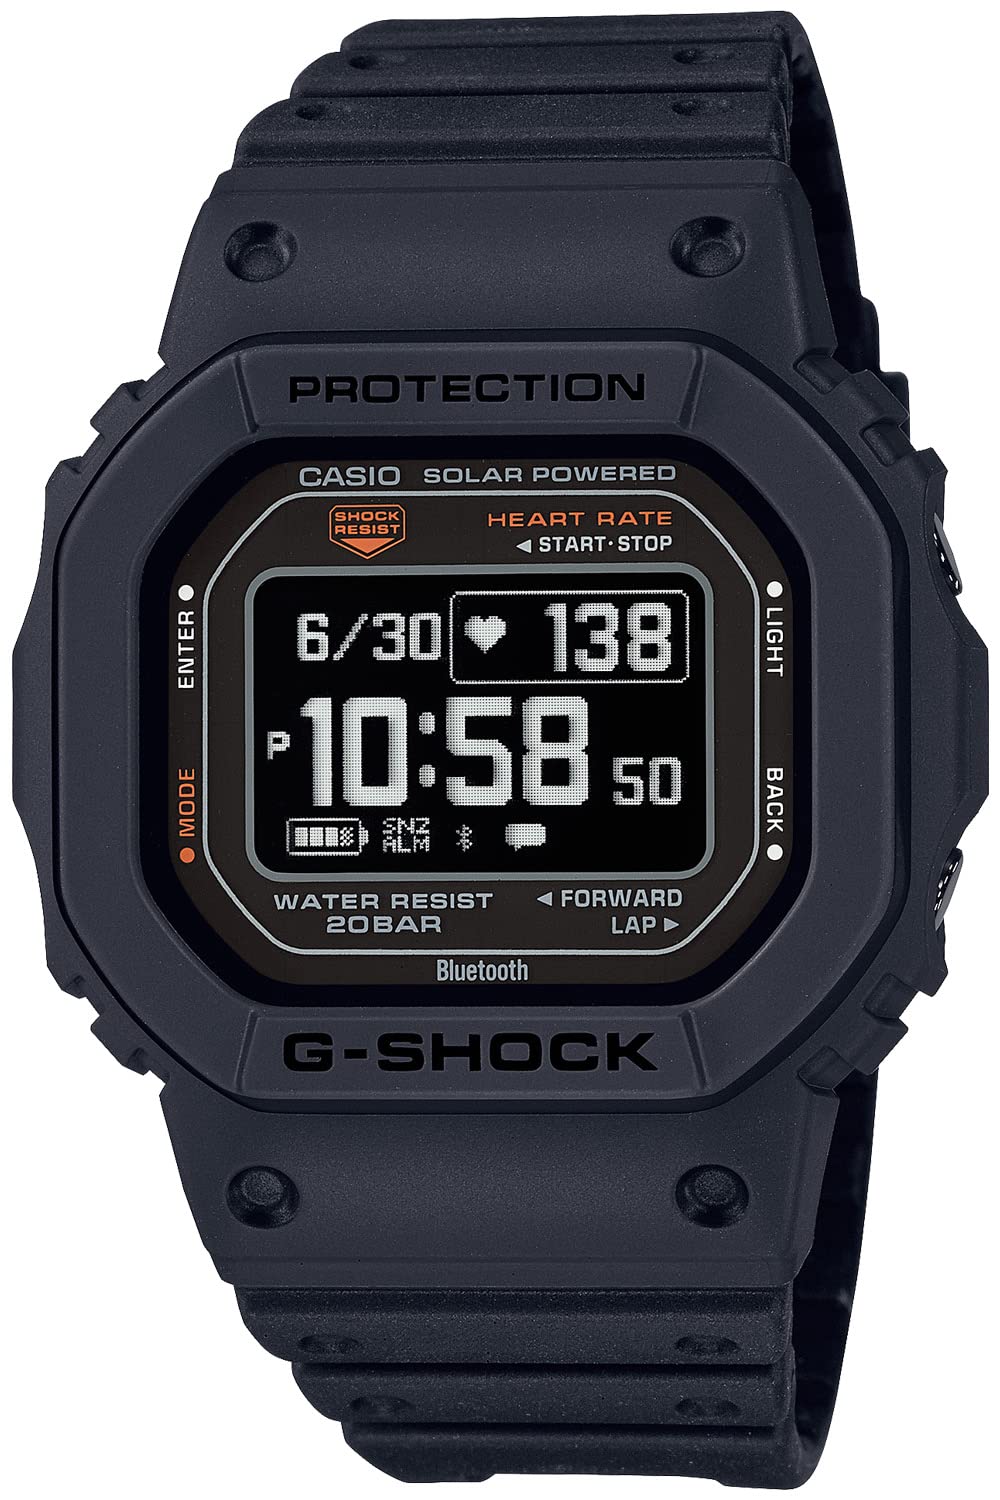 [Casio] G-Shock Watch [Domestic Genuine Product] G-SQUAD Heart Rate Monitor with Bluetooth DW-H5600-1JR Men's Black - BanzaiHobby